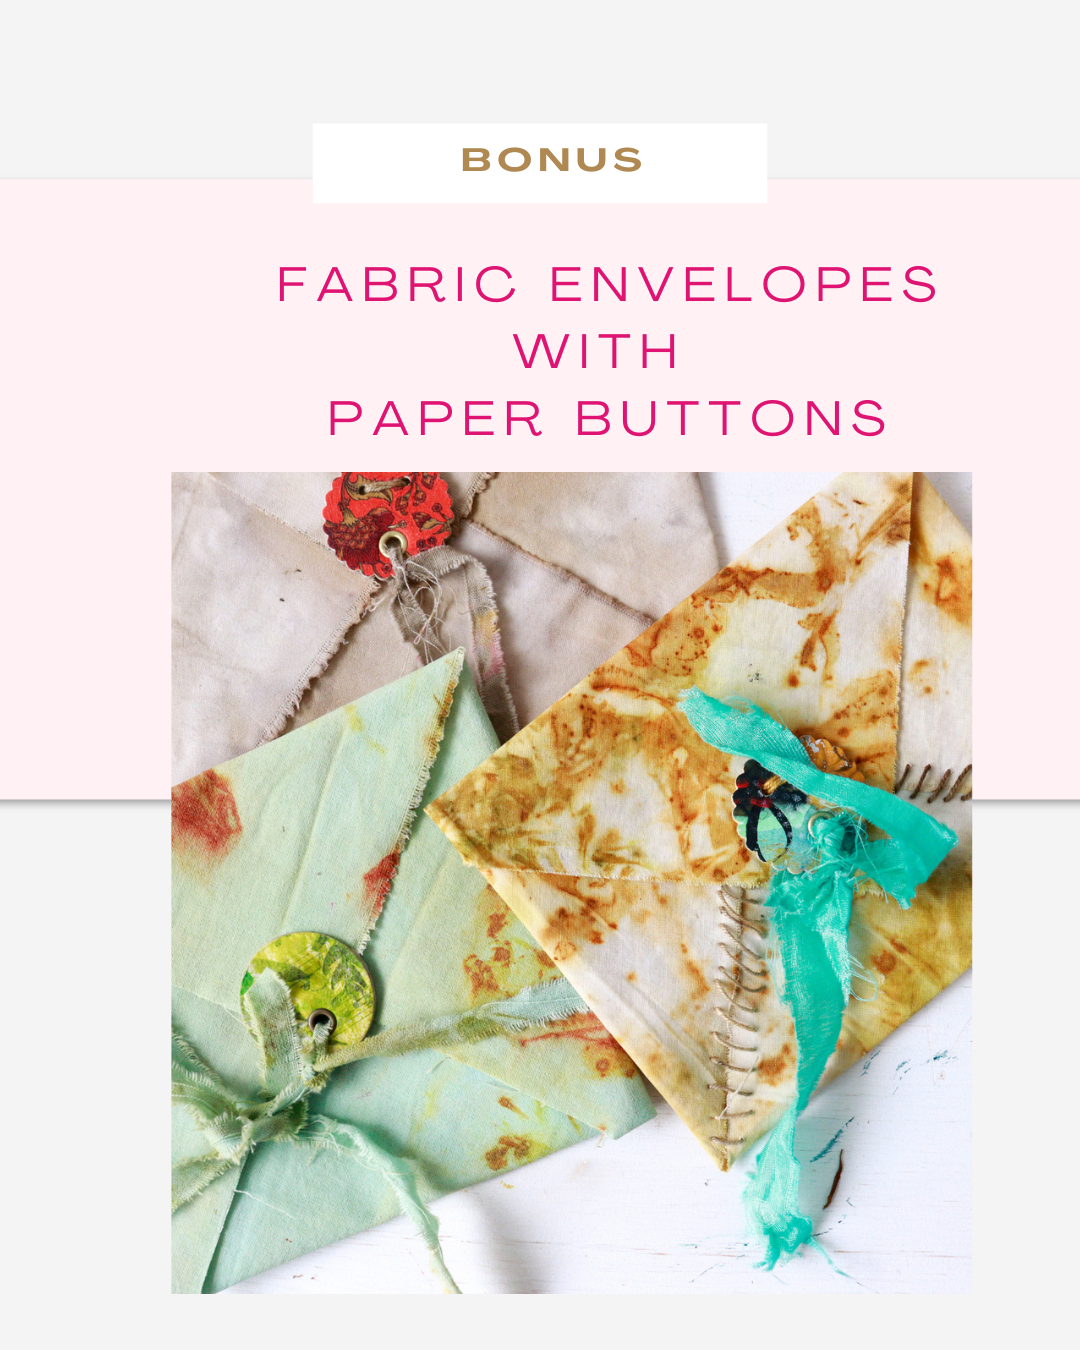 Paper Buttons course